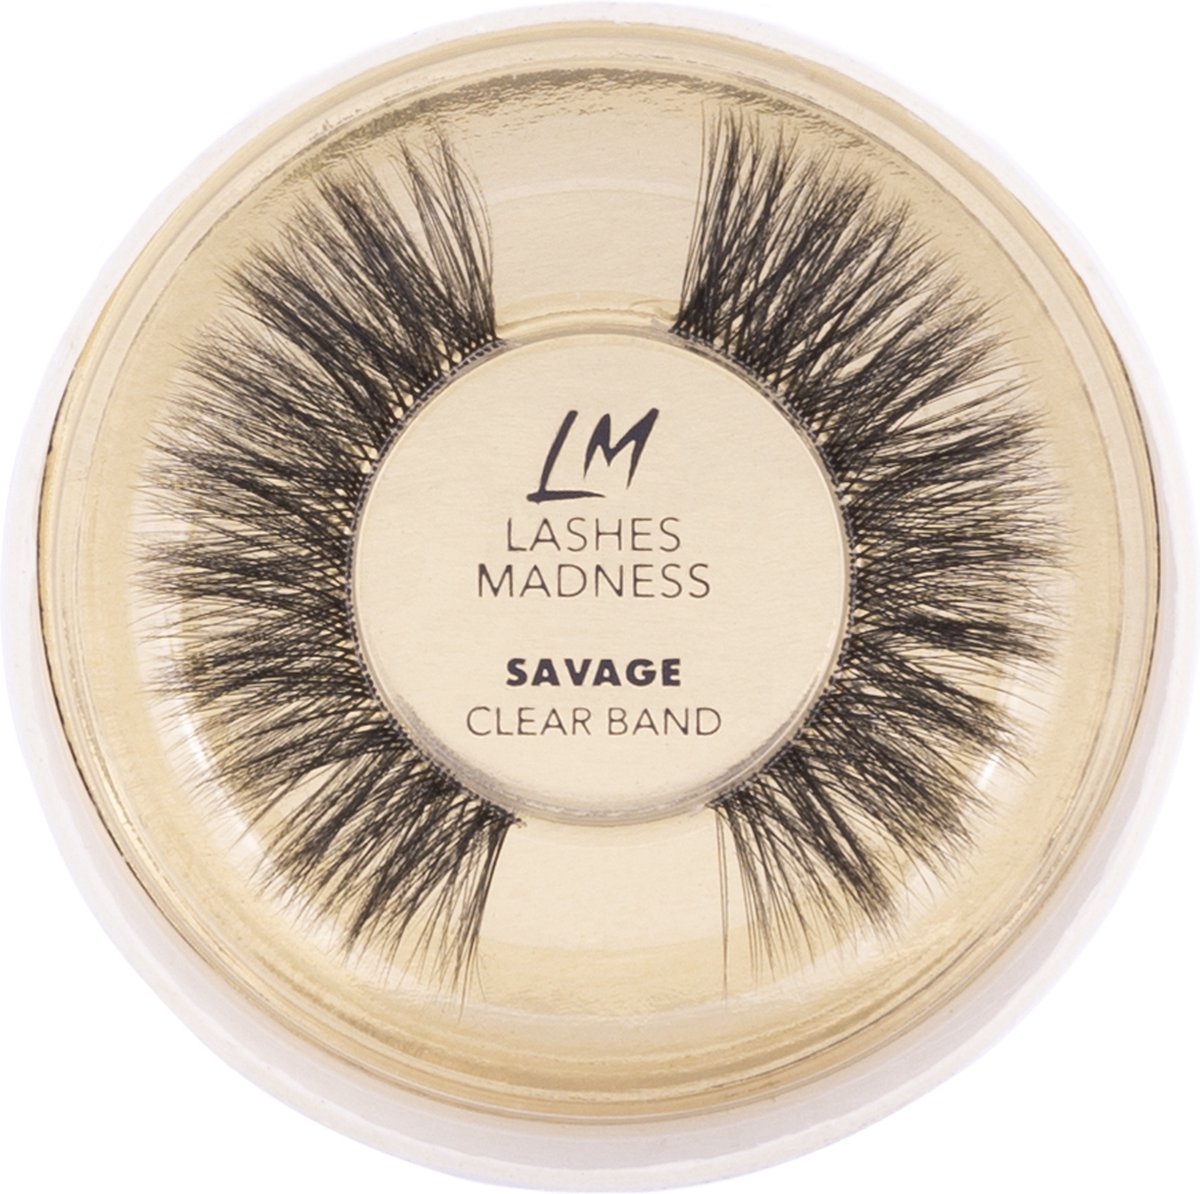 Lashes Madness - SAVAGE - Clear Band - Vegan Mink Lashes - Wimpers - Valse Wimpers - Eyelashes - Luxe Wimpers